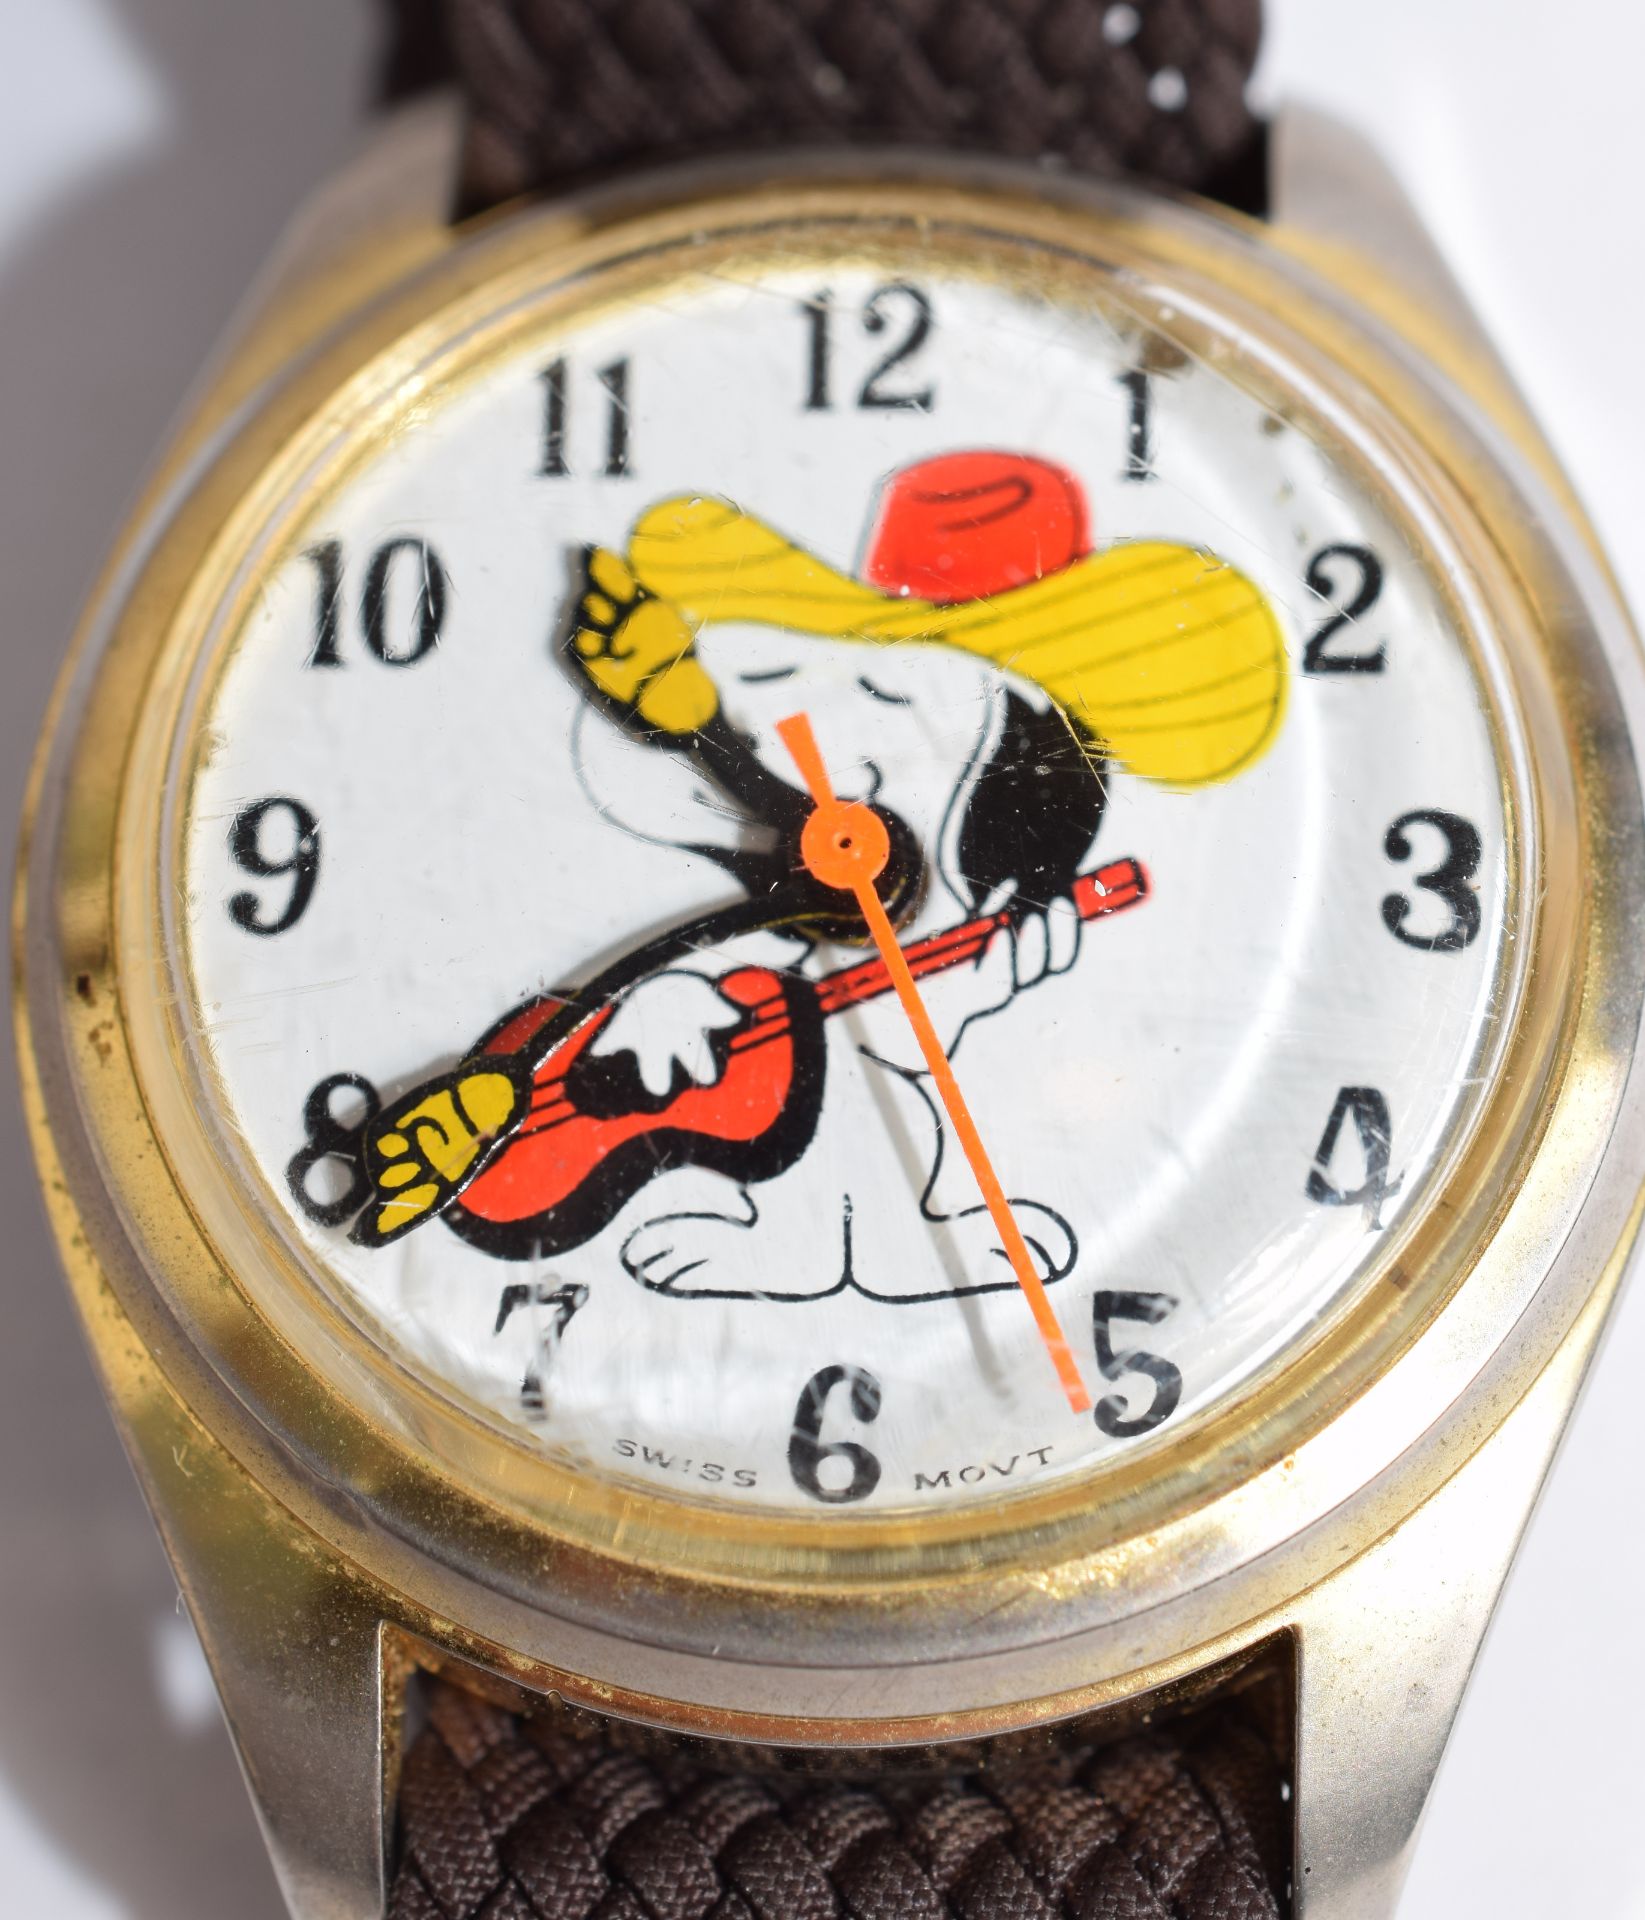 Vintage Snoopy Watch (Proceeds go to a charity)